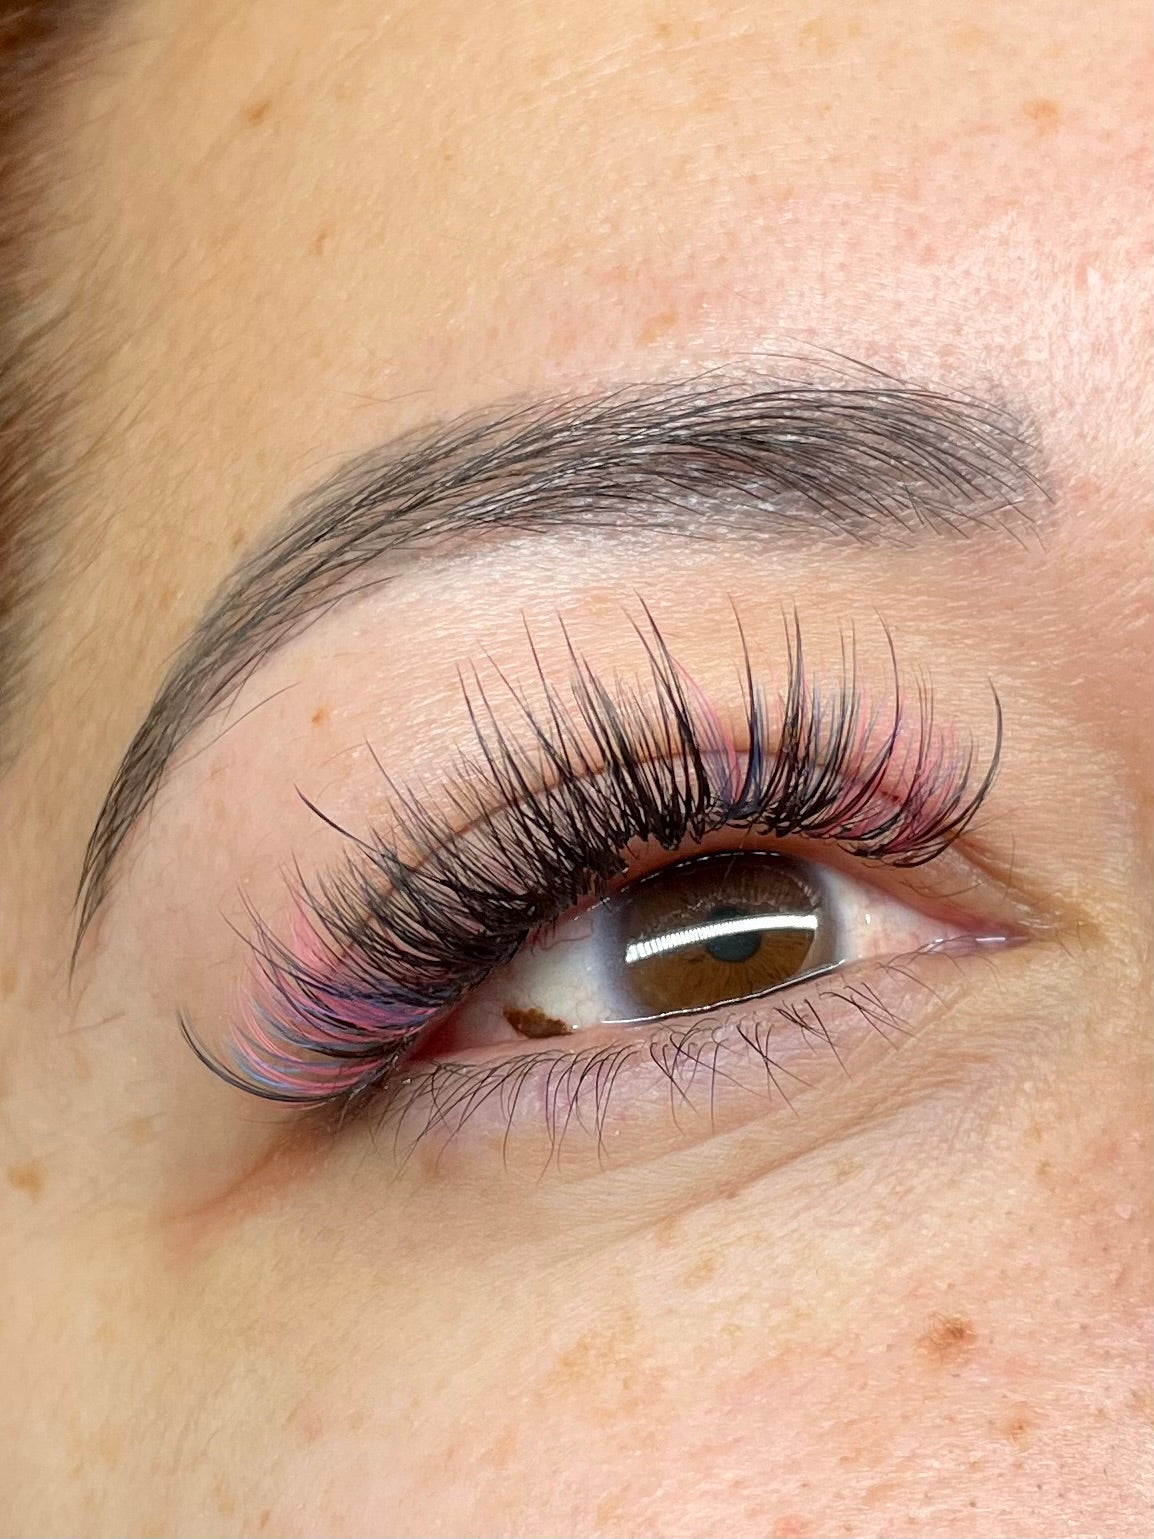 The Lash Den Los Angeles: eyelash extensions, lash lifting, brow lamination, and training and education for lash artists, estheticians, and cosmetologists 